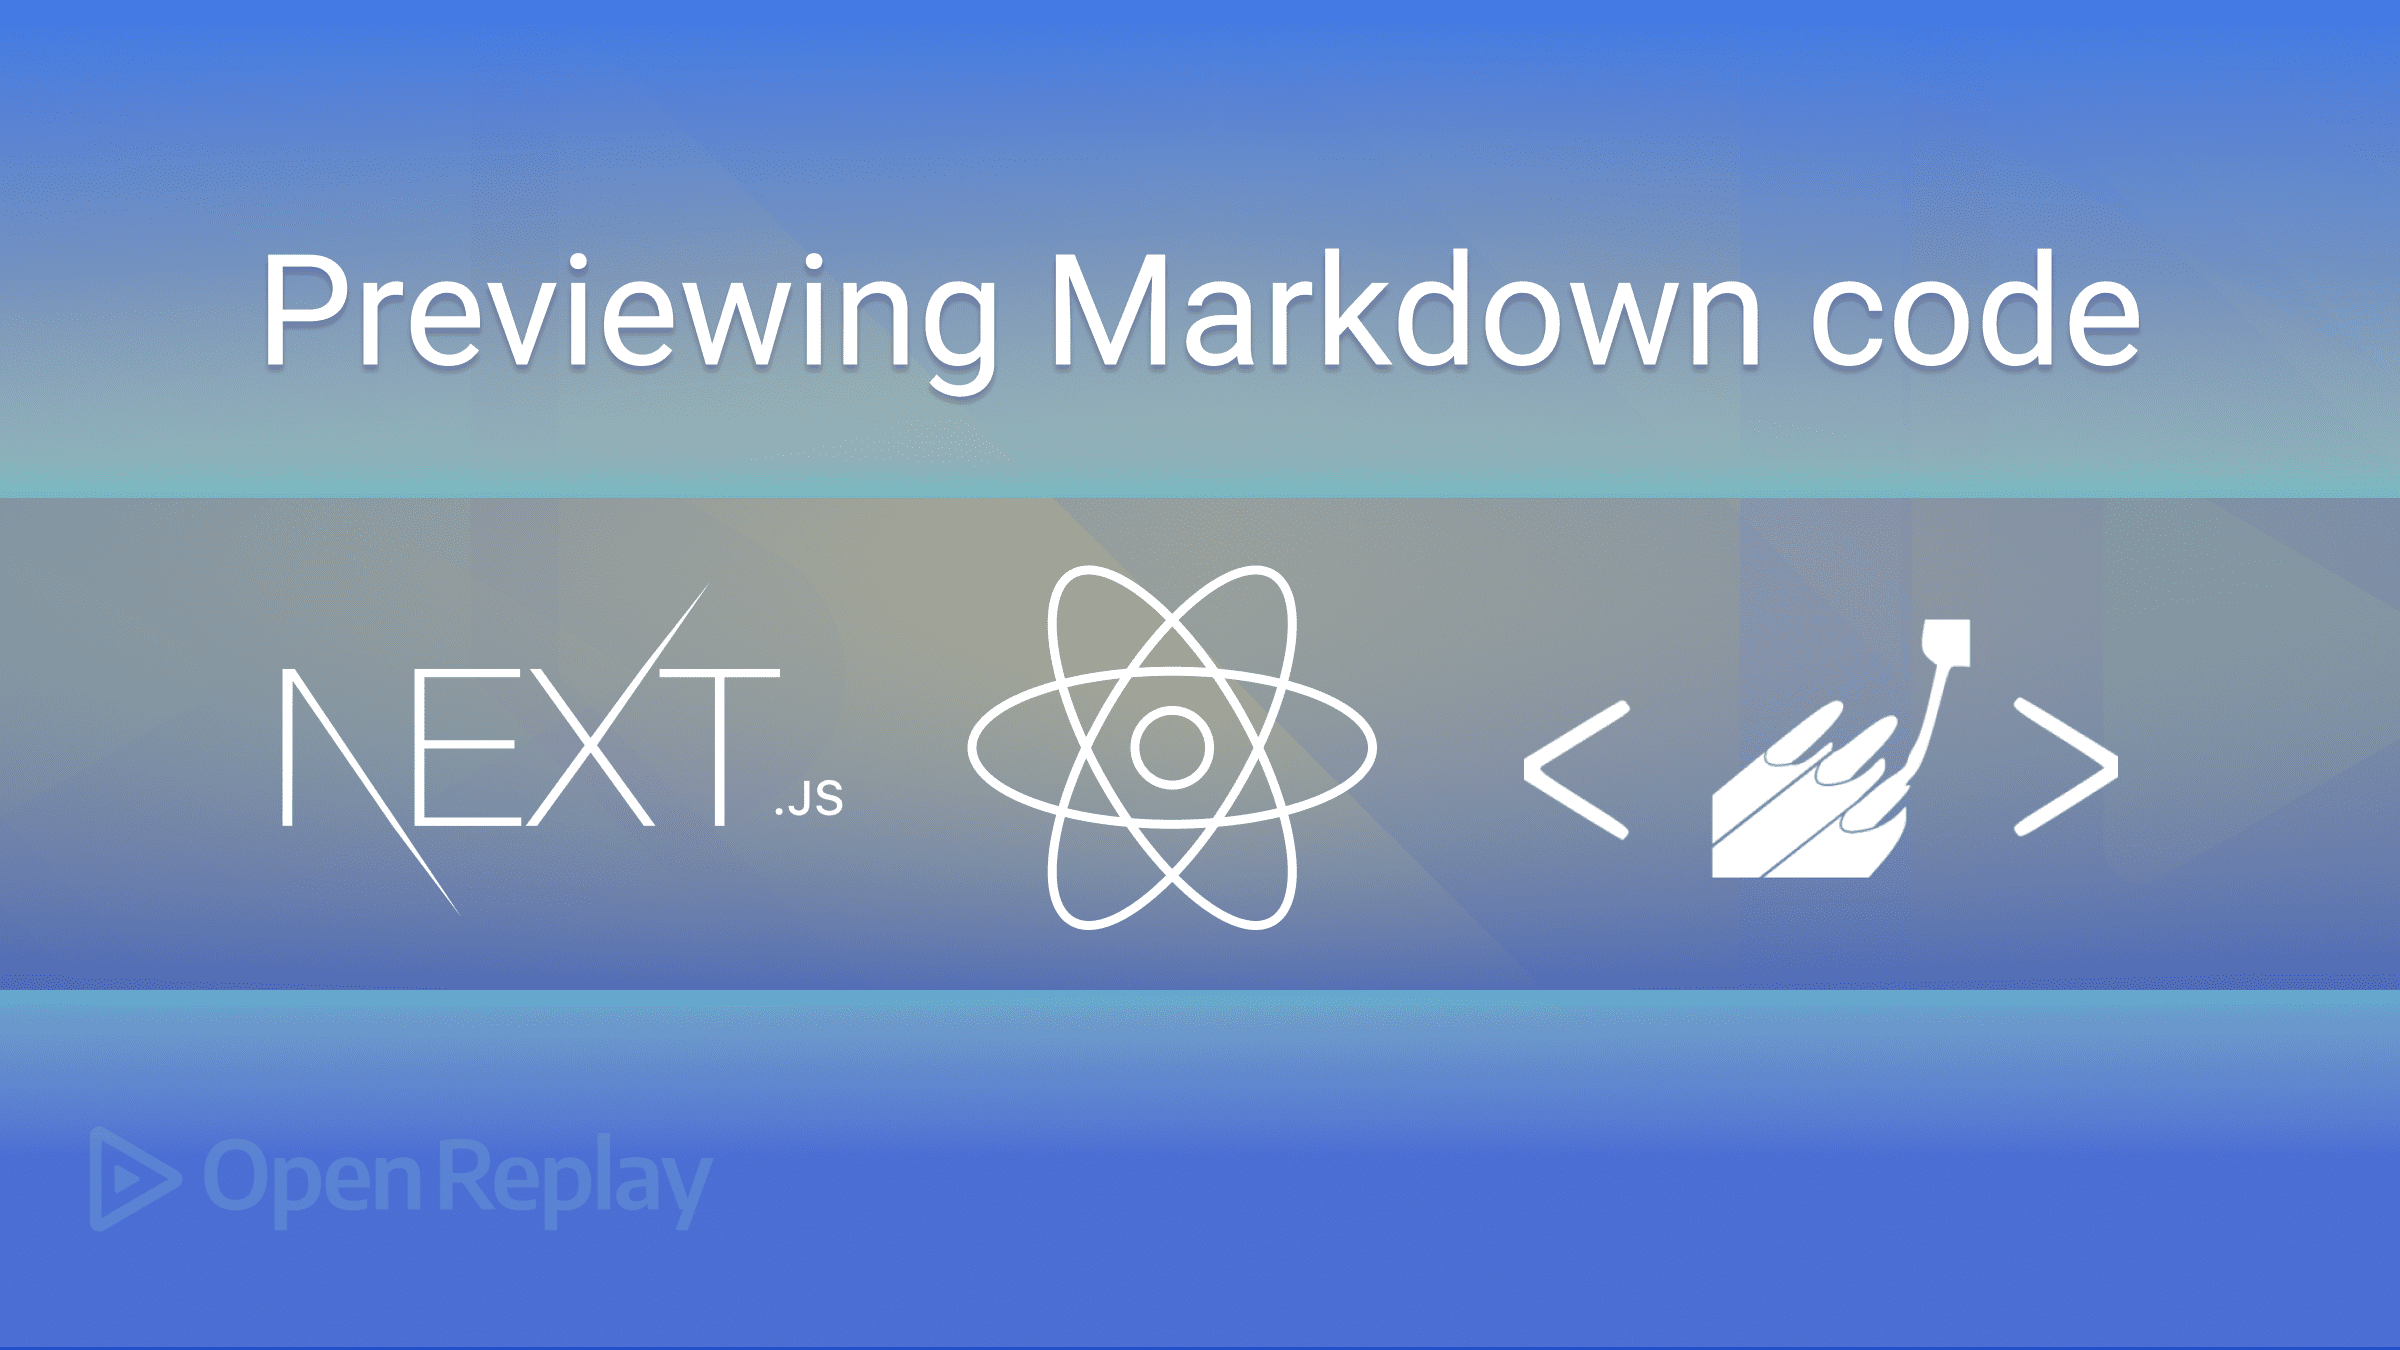 Previewing Markdown code with React